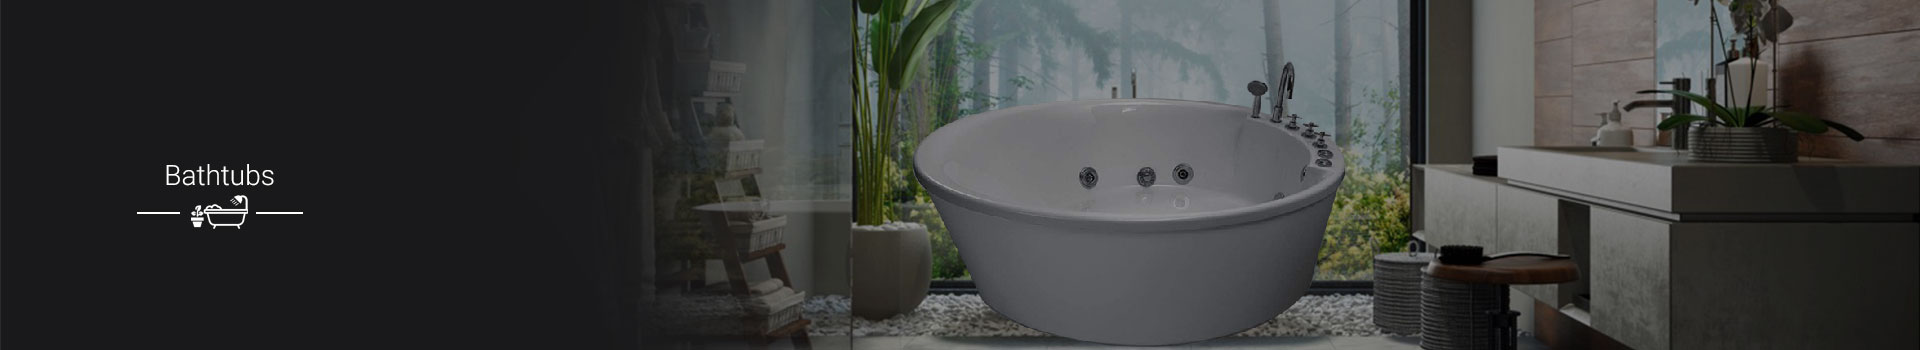 Bath Tub Manufacturers and Supplier from New Delhi, India - Shanti Ventures